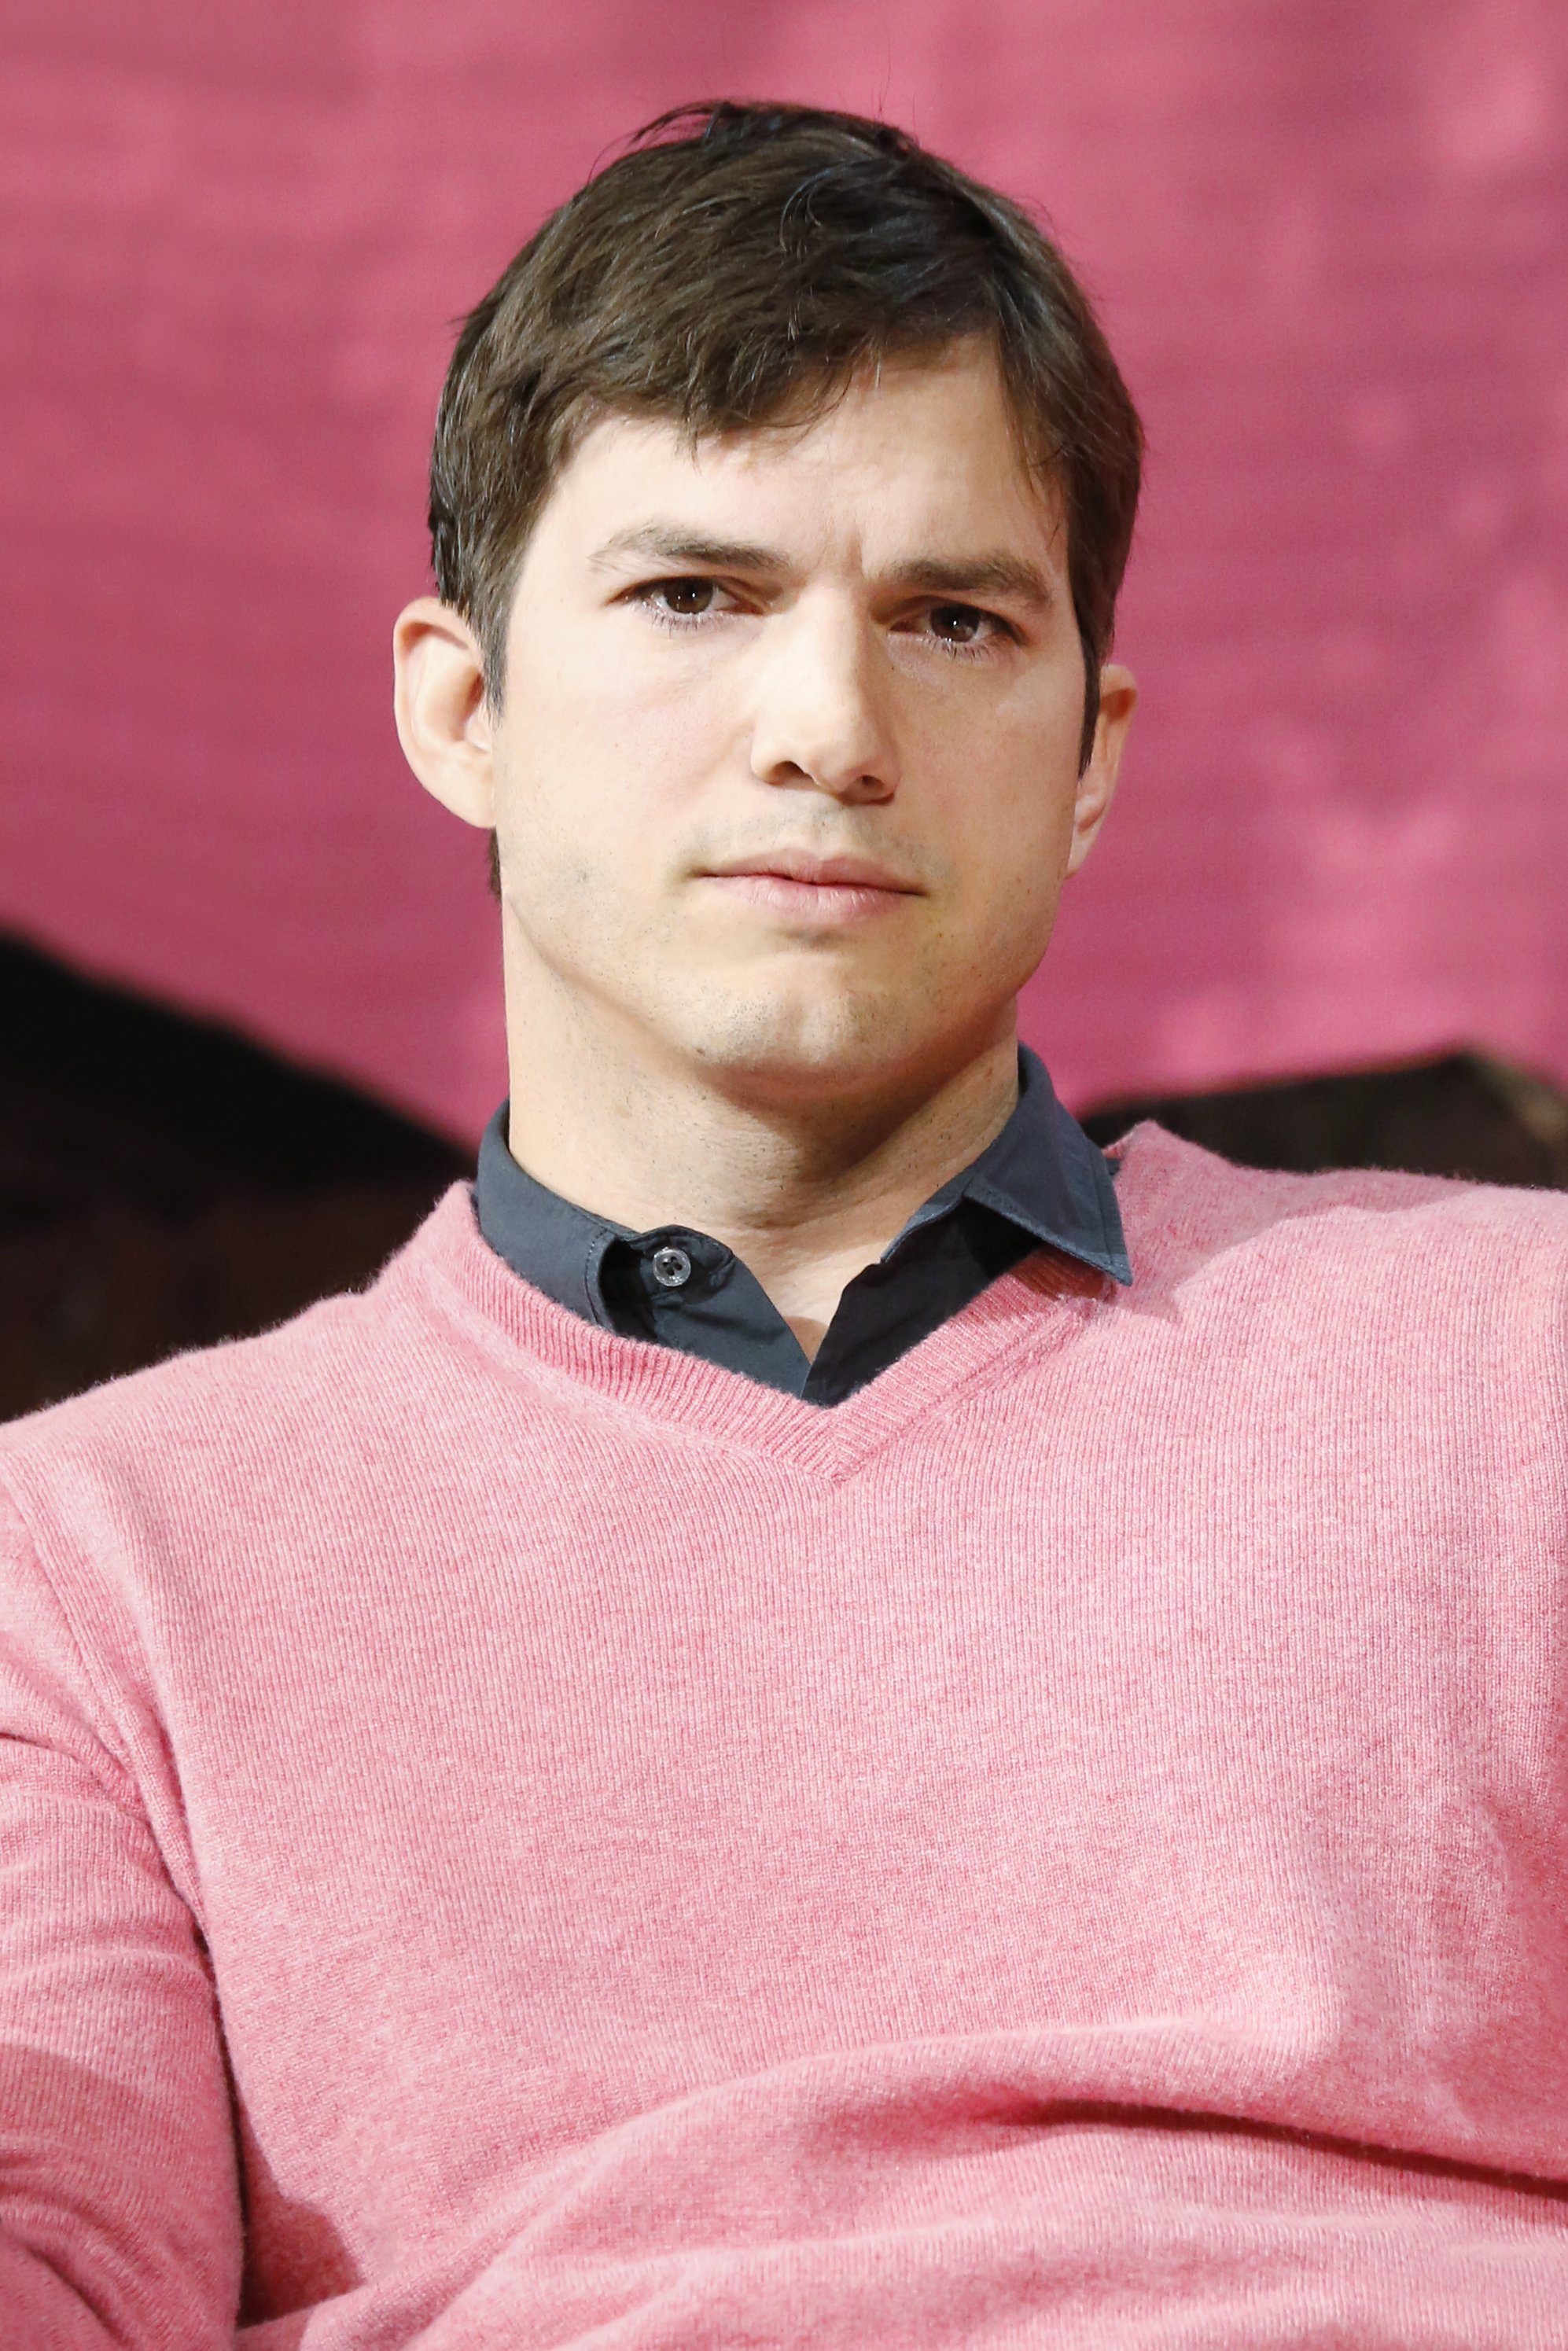 Ashton Kutcher appears on stage during the 'The Game Plan: Strategies for Entrepreneurs' Airbnb Open 2016 on November 19, 2016, in Los Angeles, California. | Source: Getty Images.